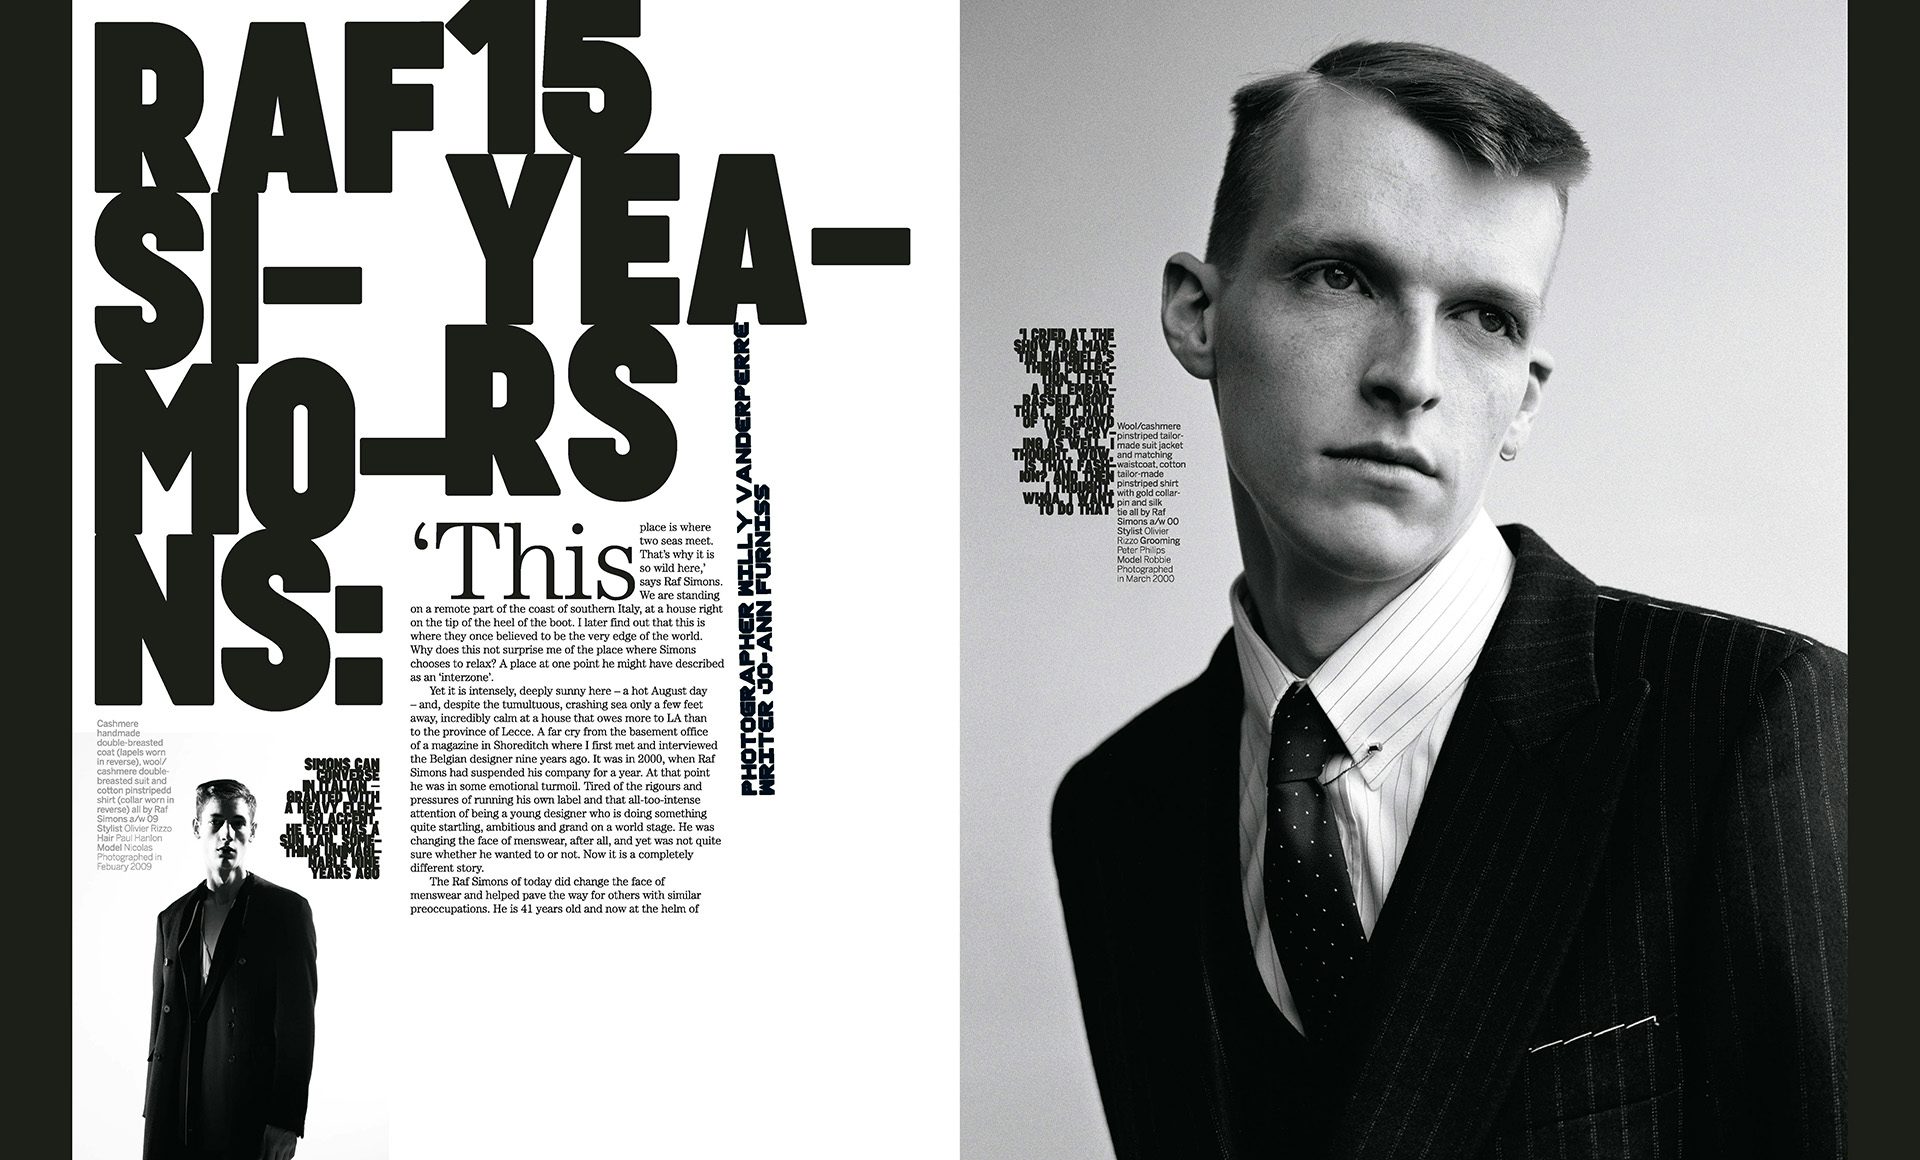 Image is of an Arena Homme + magazine spread headlined 'Raf Simons 15 Years' split into columns, and a black and white photograph of a person wearing a Raf Simons suit on the right hand page